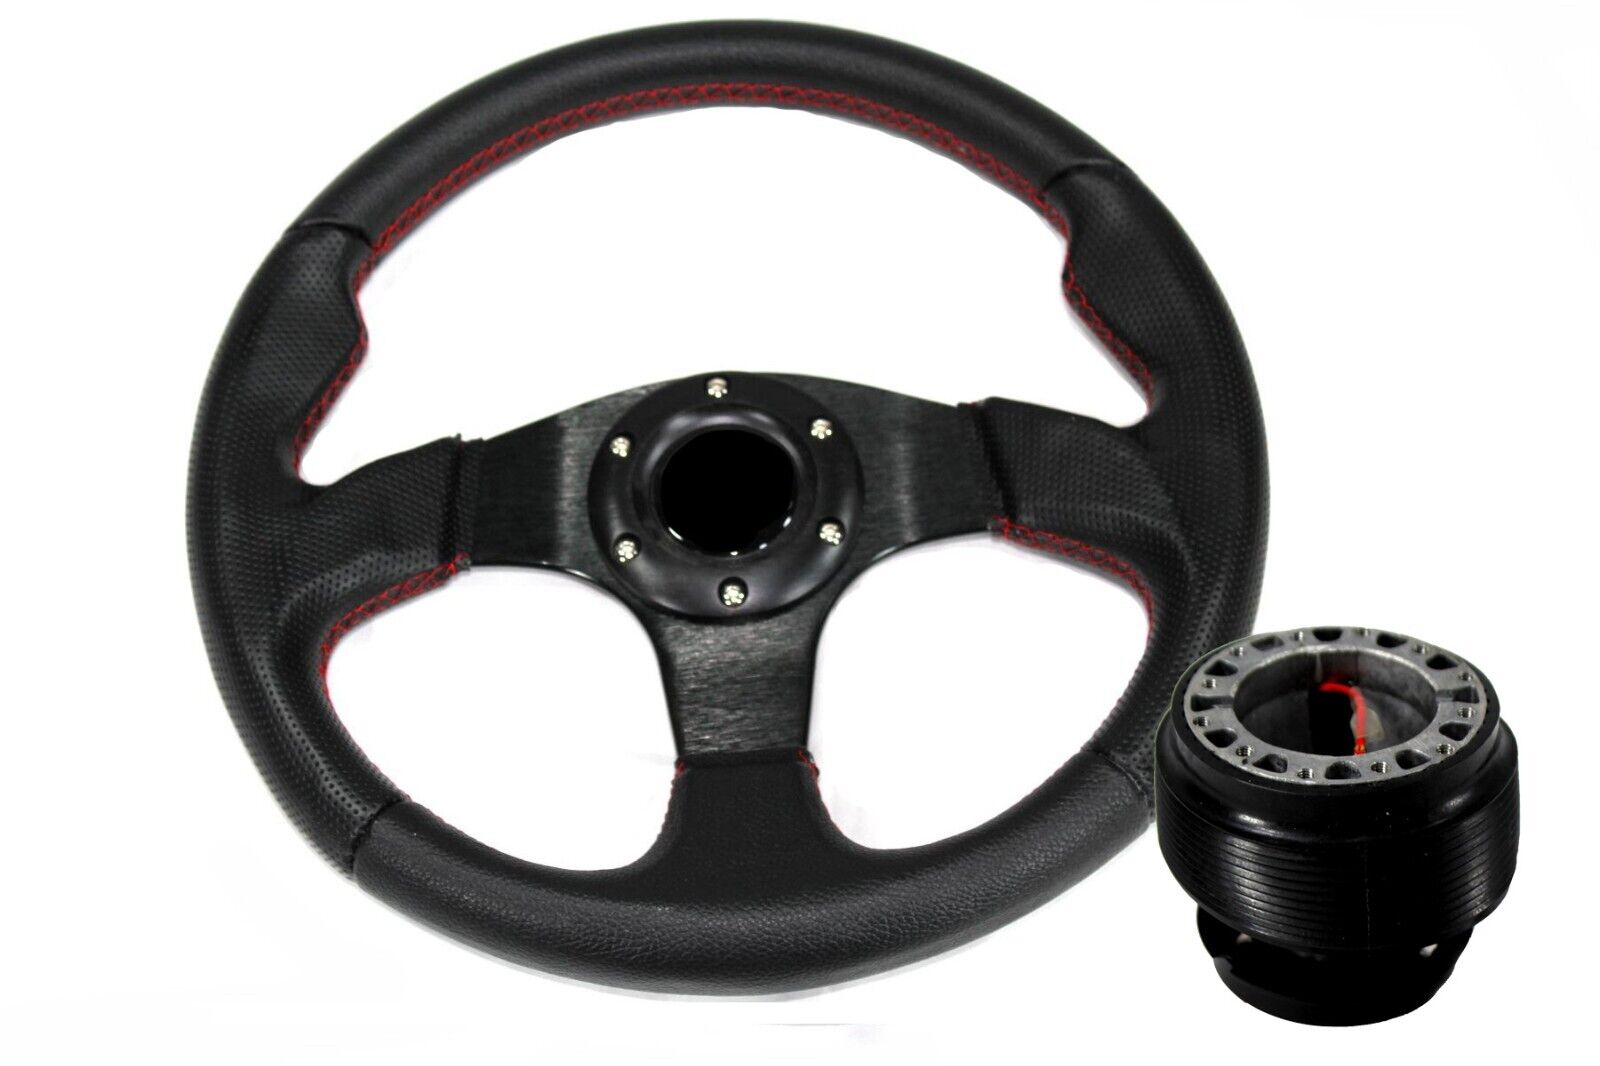 Civic Prelude CR-V RSX Fit Accord TL CL S2000 Black Steering Wheel w/Red + Hub